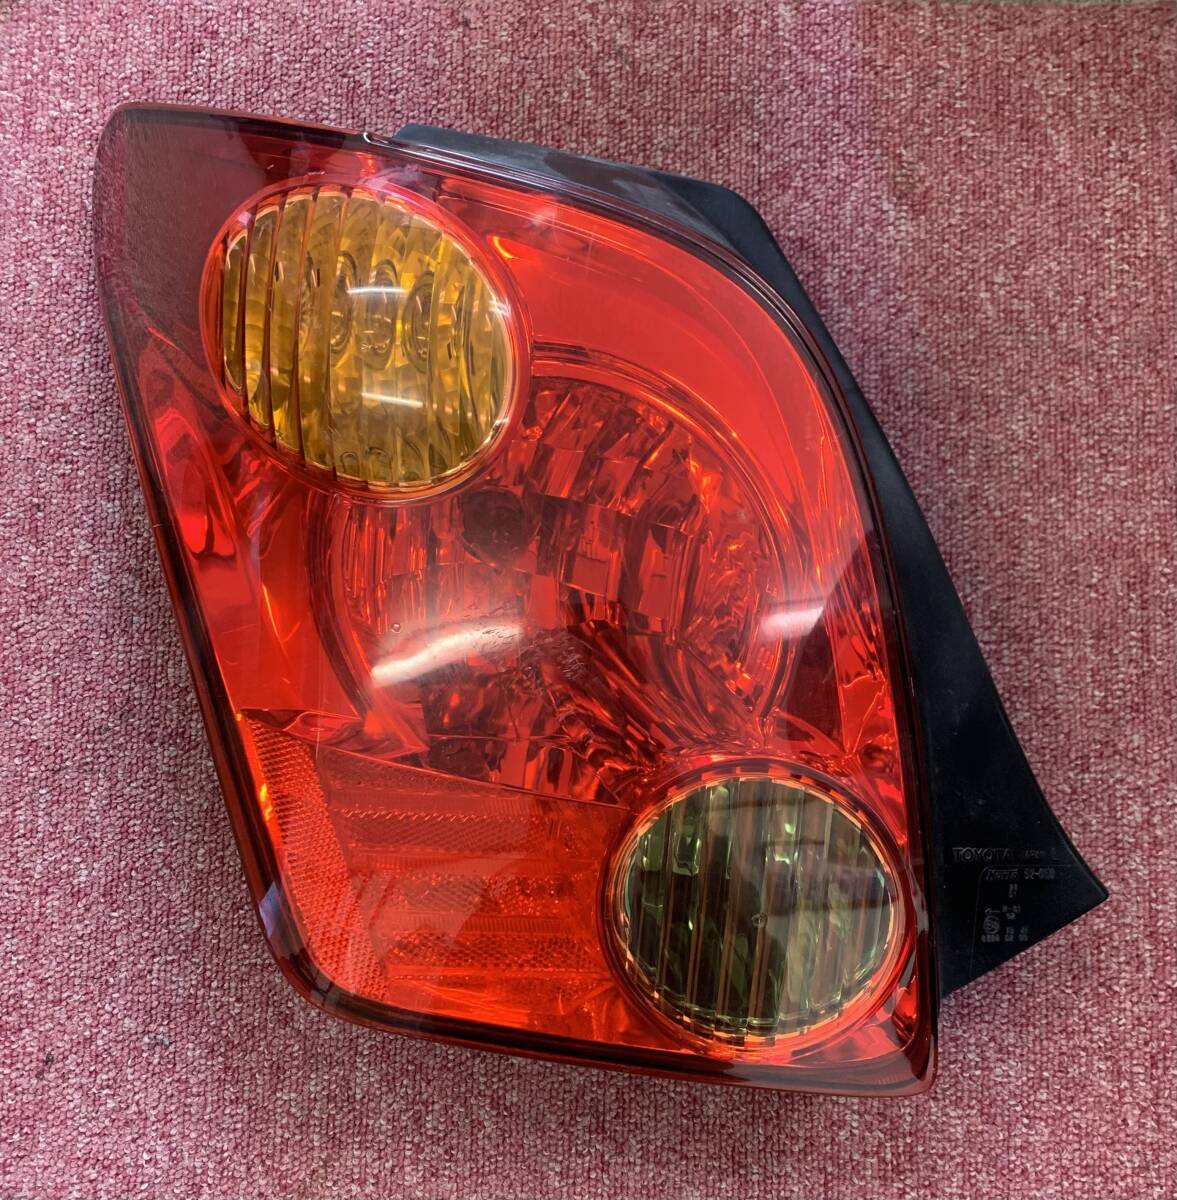  free shipping * Toyota Ist NCP61 tail light left Koito 52-056 control number 24327